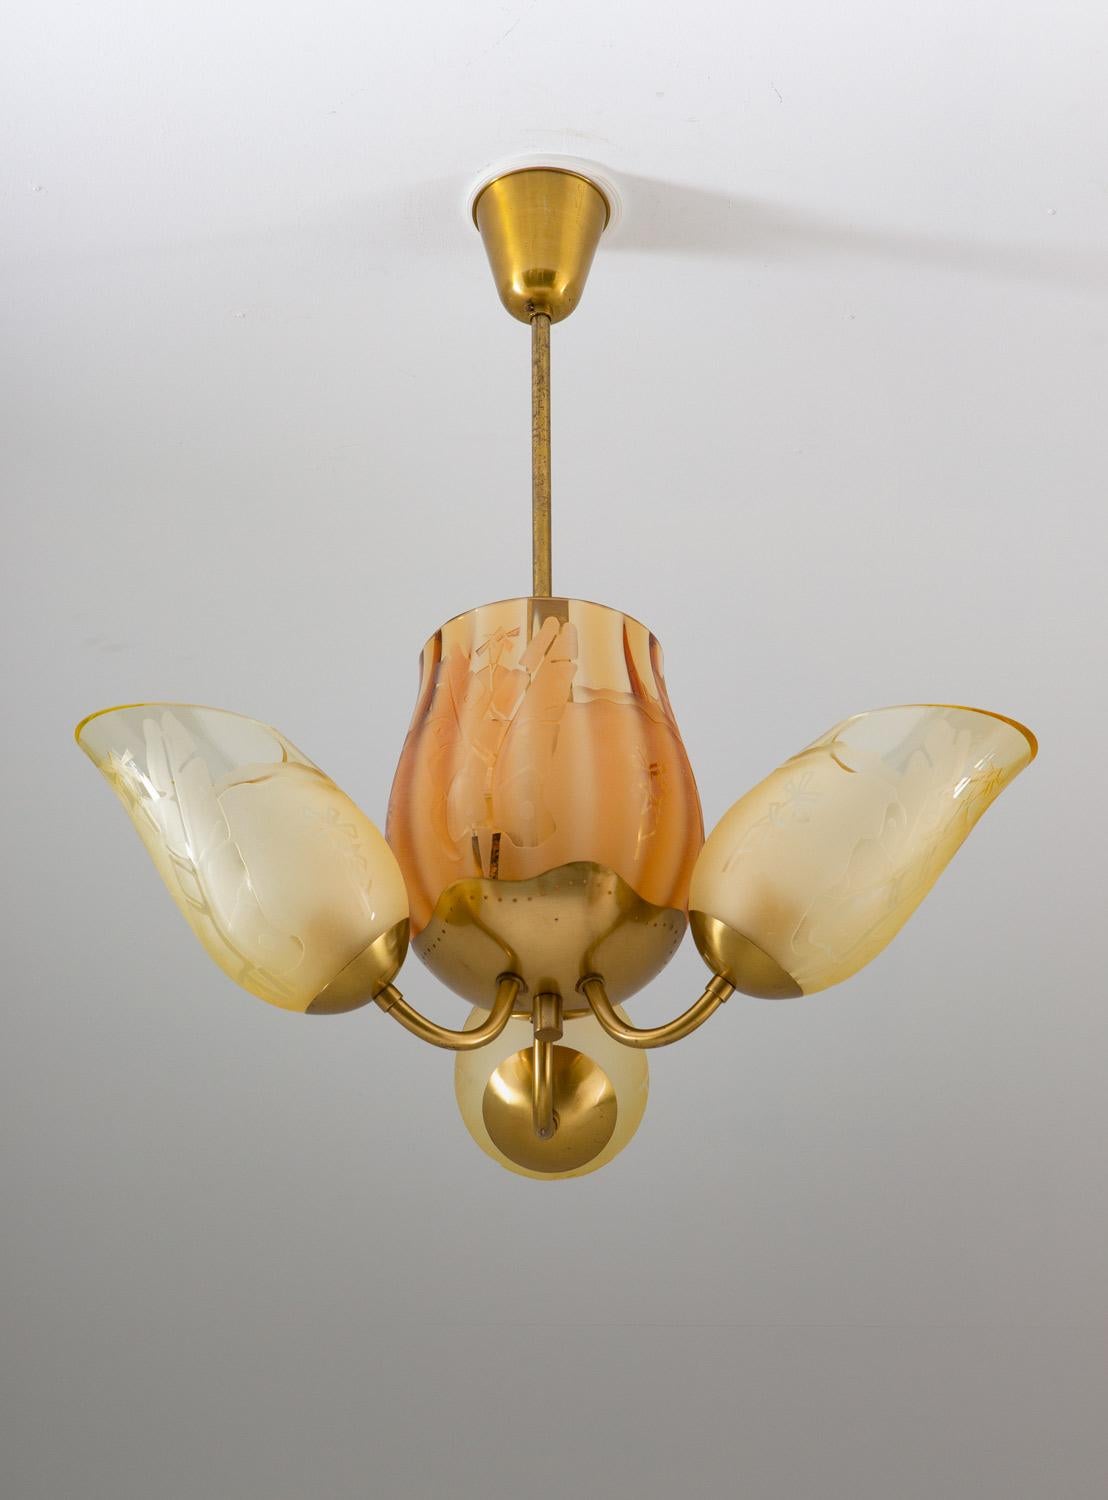 Rare chandelier by Swedish manufacturer Glössner, 1940s.
This impressive lamp features five light sources hidden by glass shades, one large in the middle with two light sources, surrounded by three smaller ones. The large shade is held by a